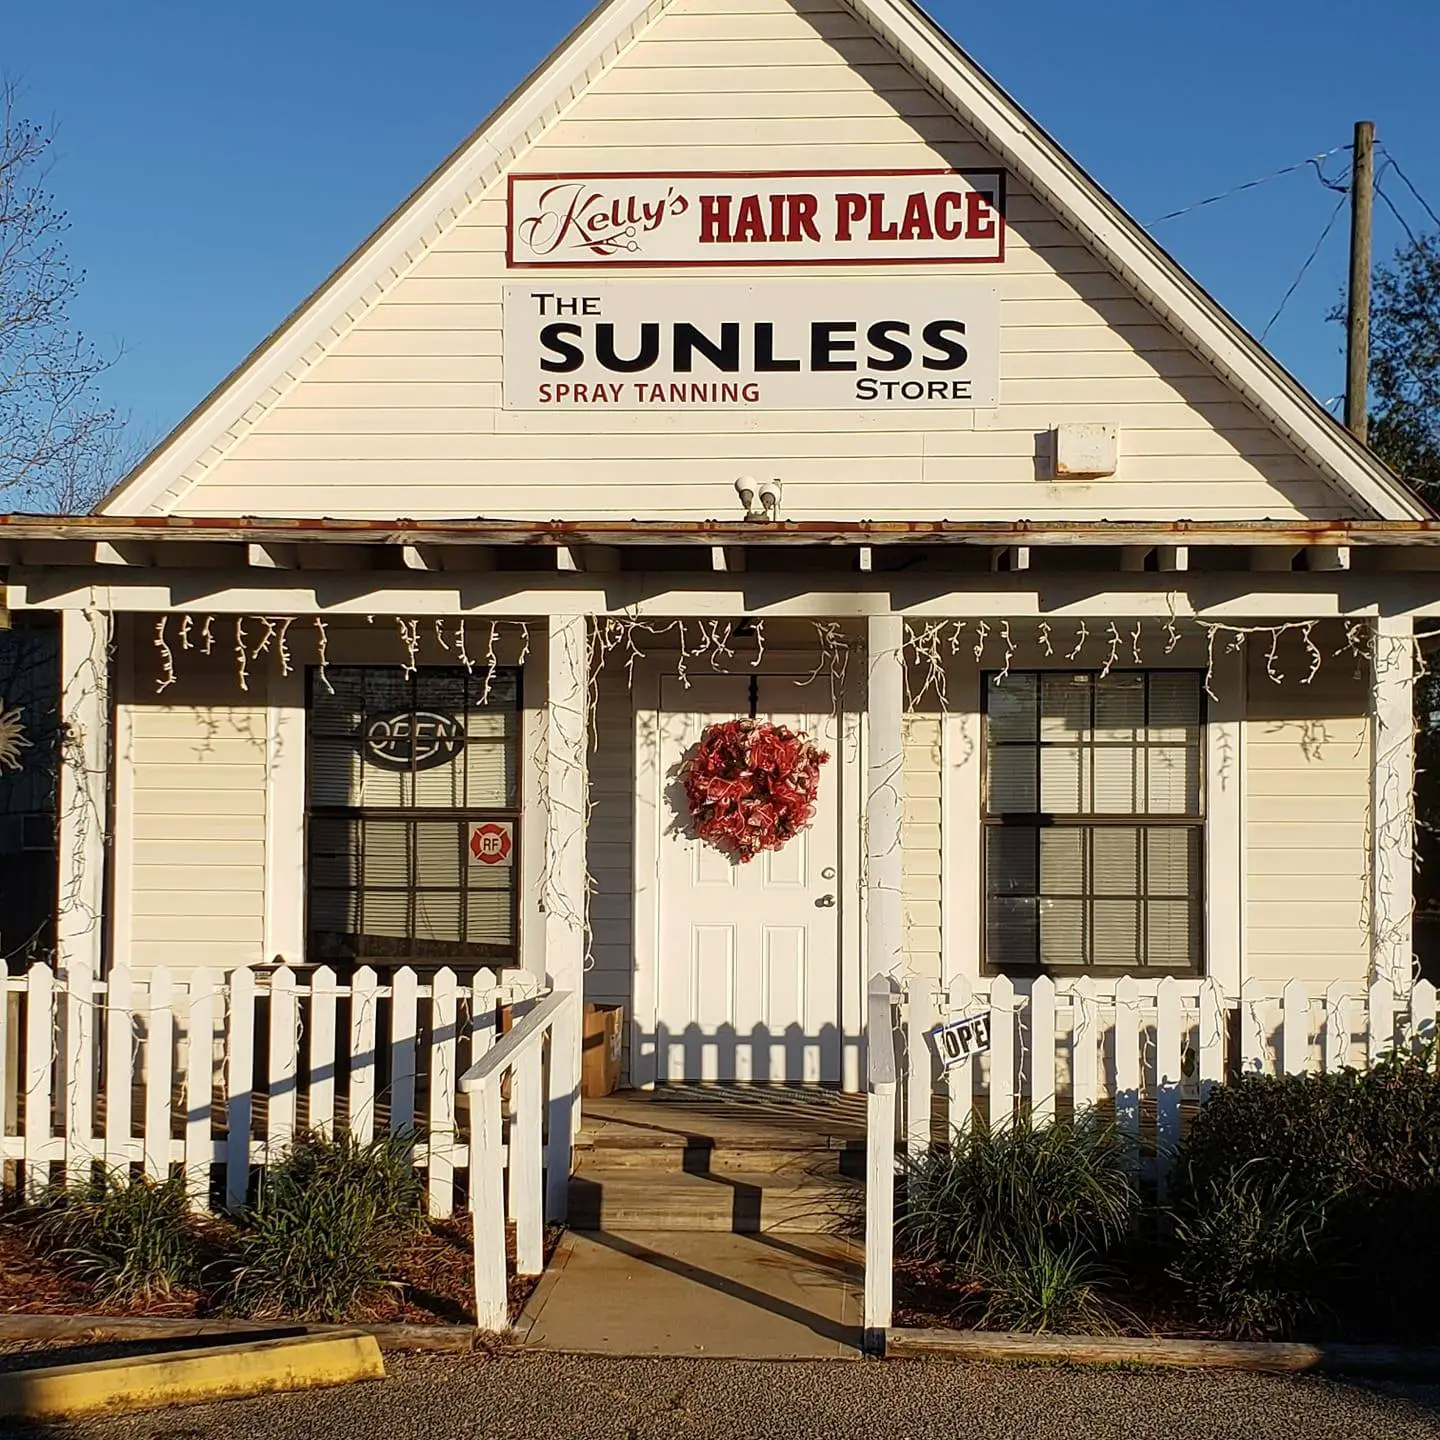 Business logo of The Sunless Store Spray Tanning Pace